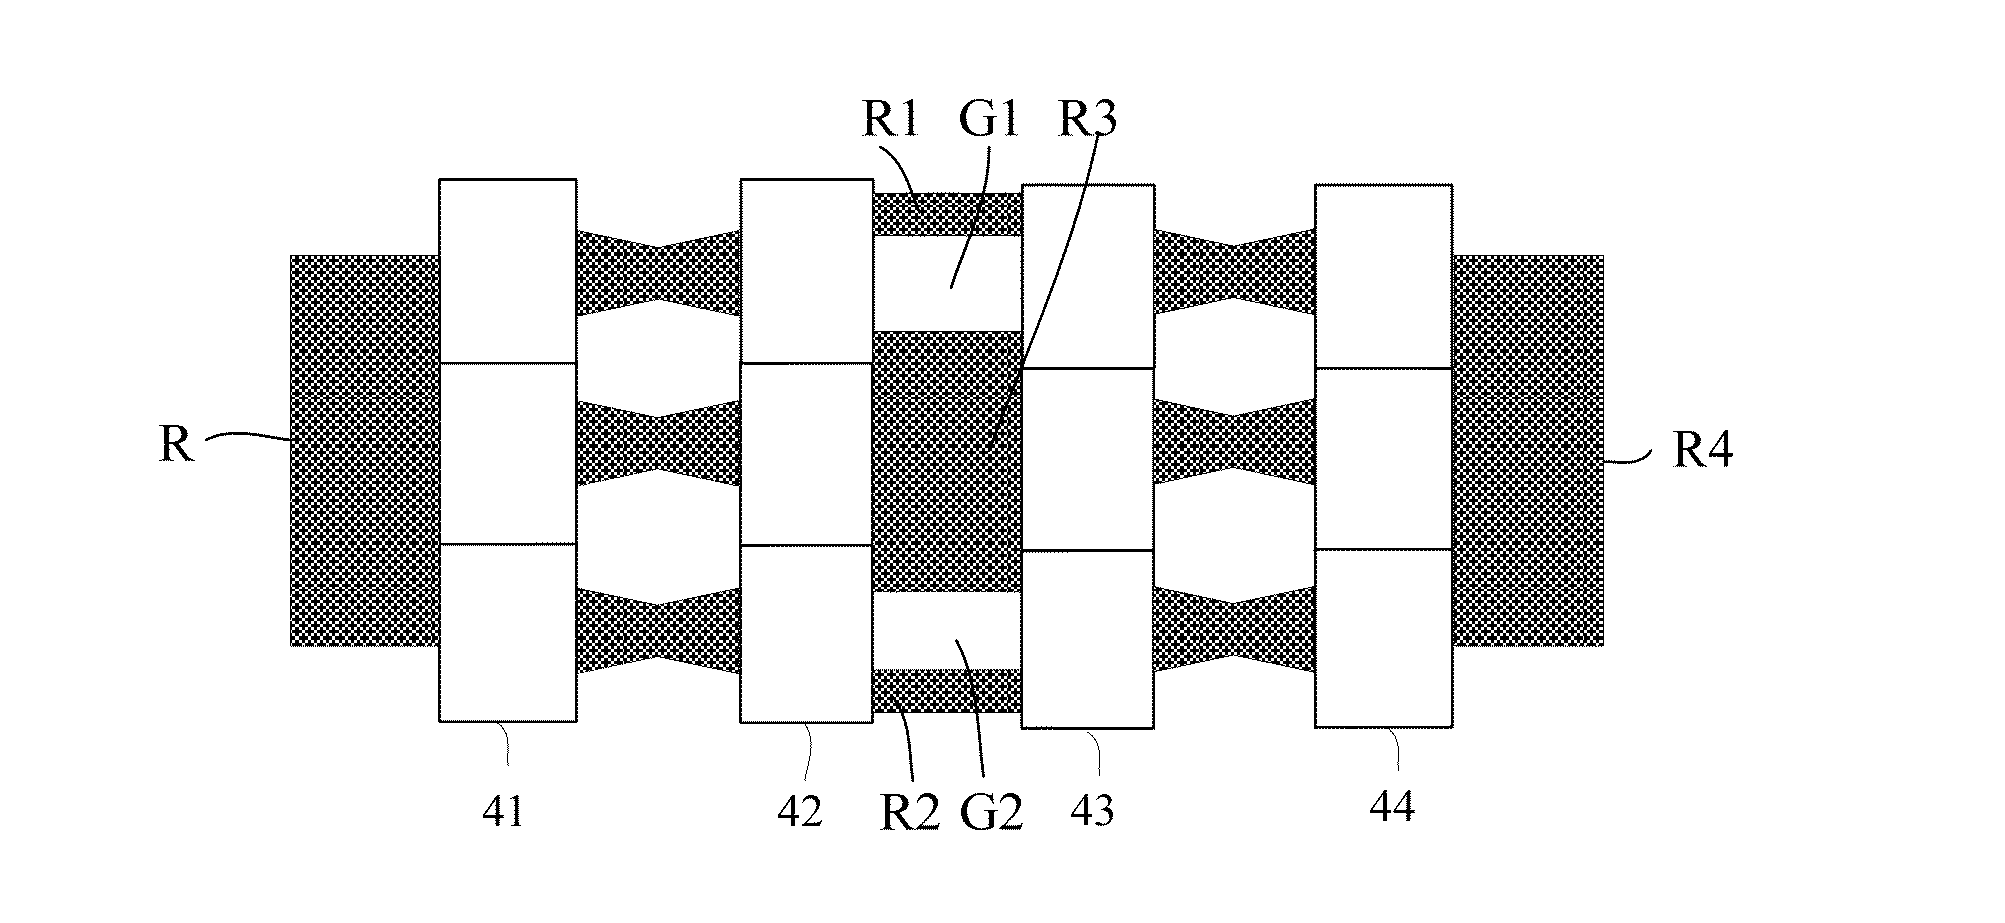 Illumination system for lithographic projection exposure step-and-scan apparatus